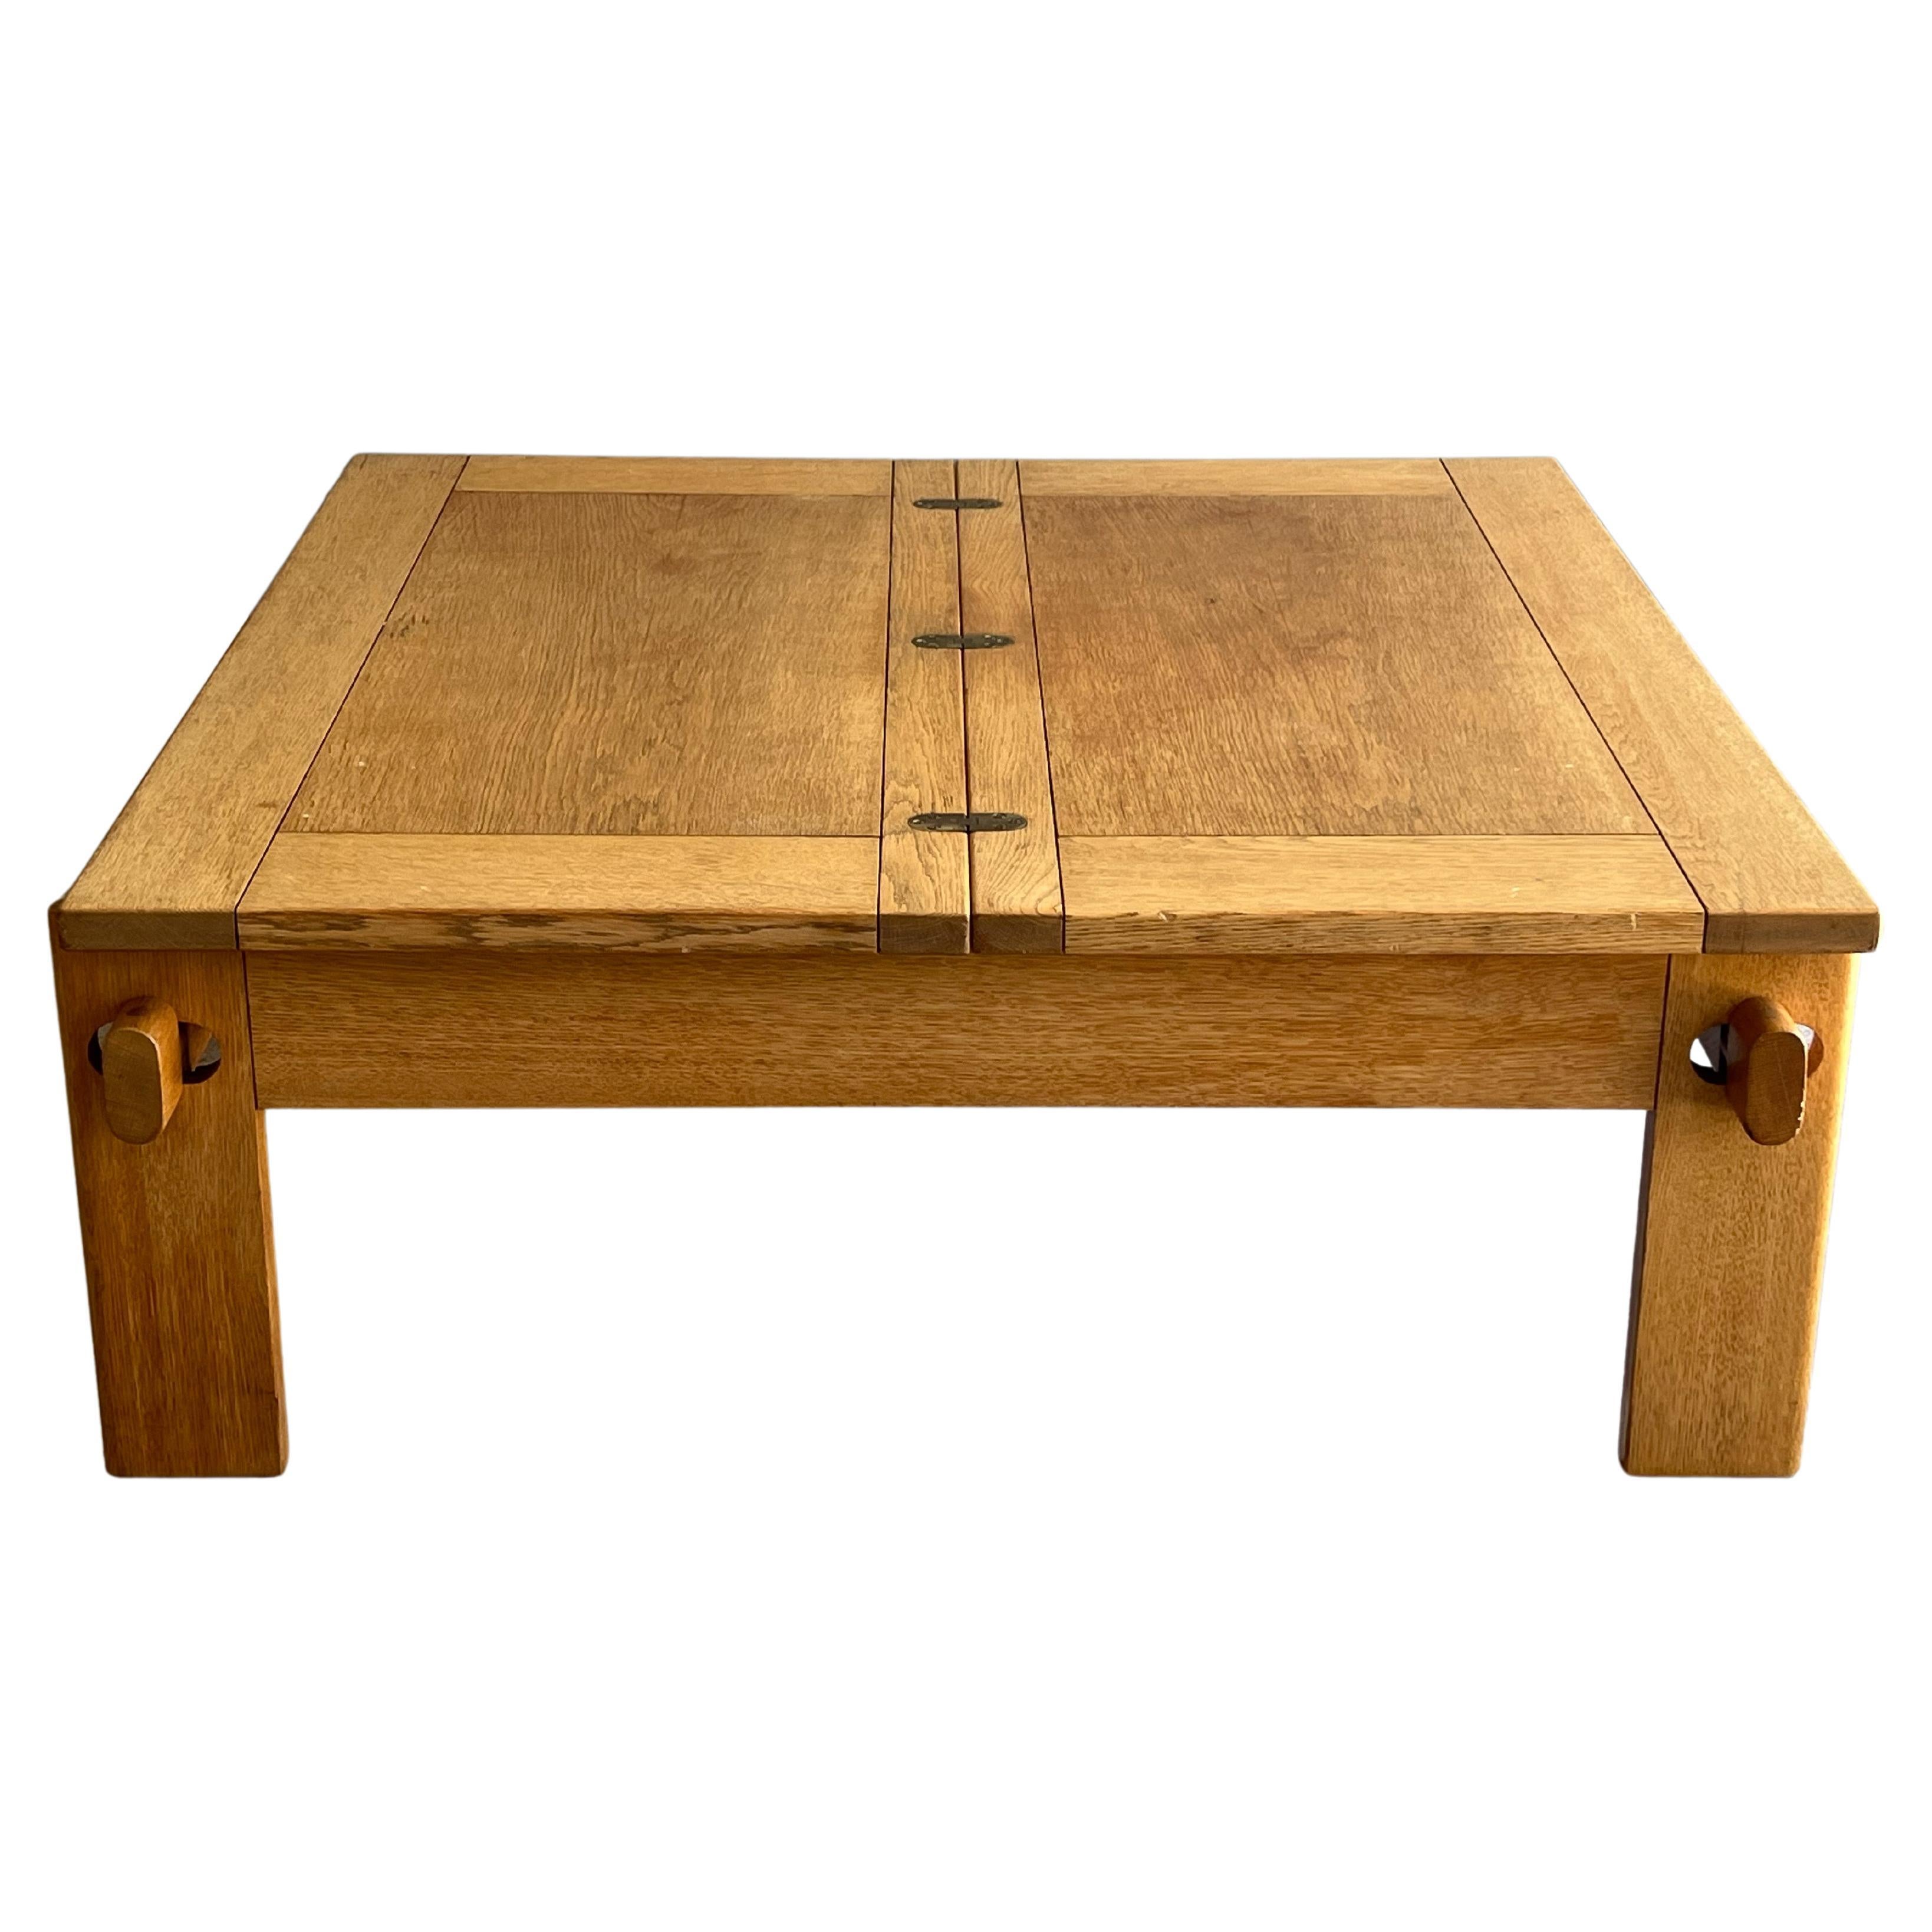 Danish Oak and Brass Coffee Table Designed by Tage Poulsen, 1960s